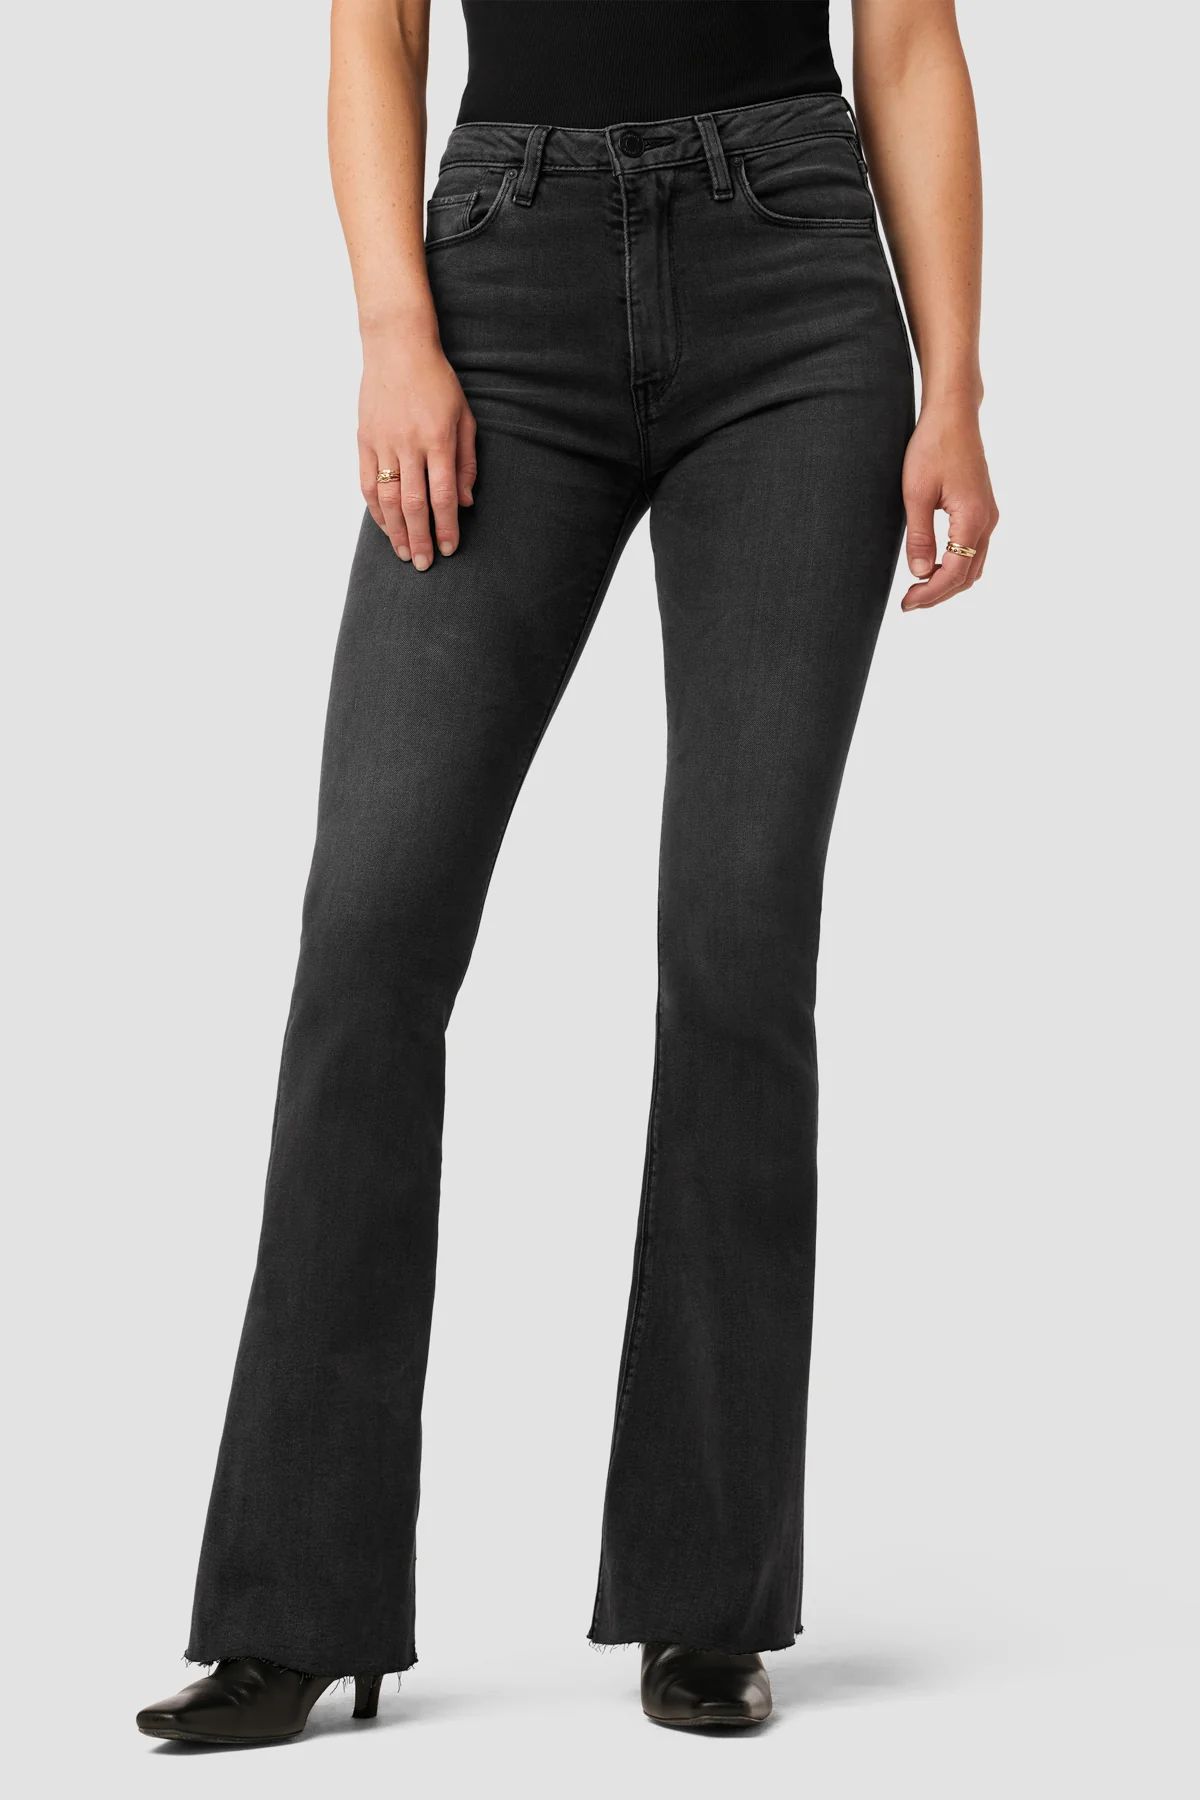 Holly High-Rise Flare Petite Jean | Hudson Jeans